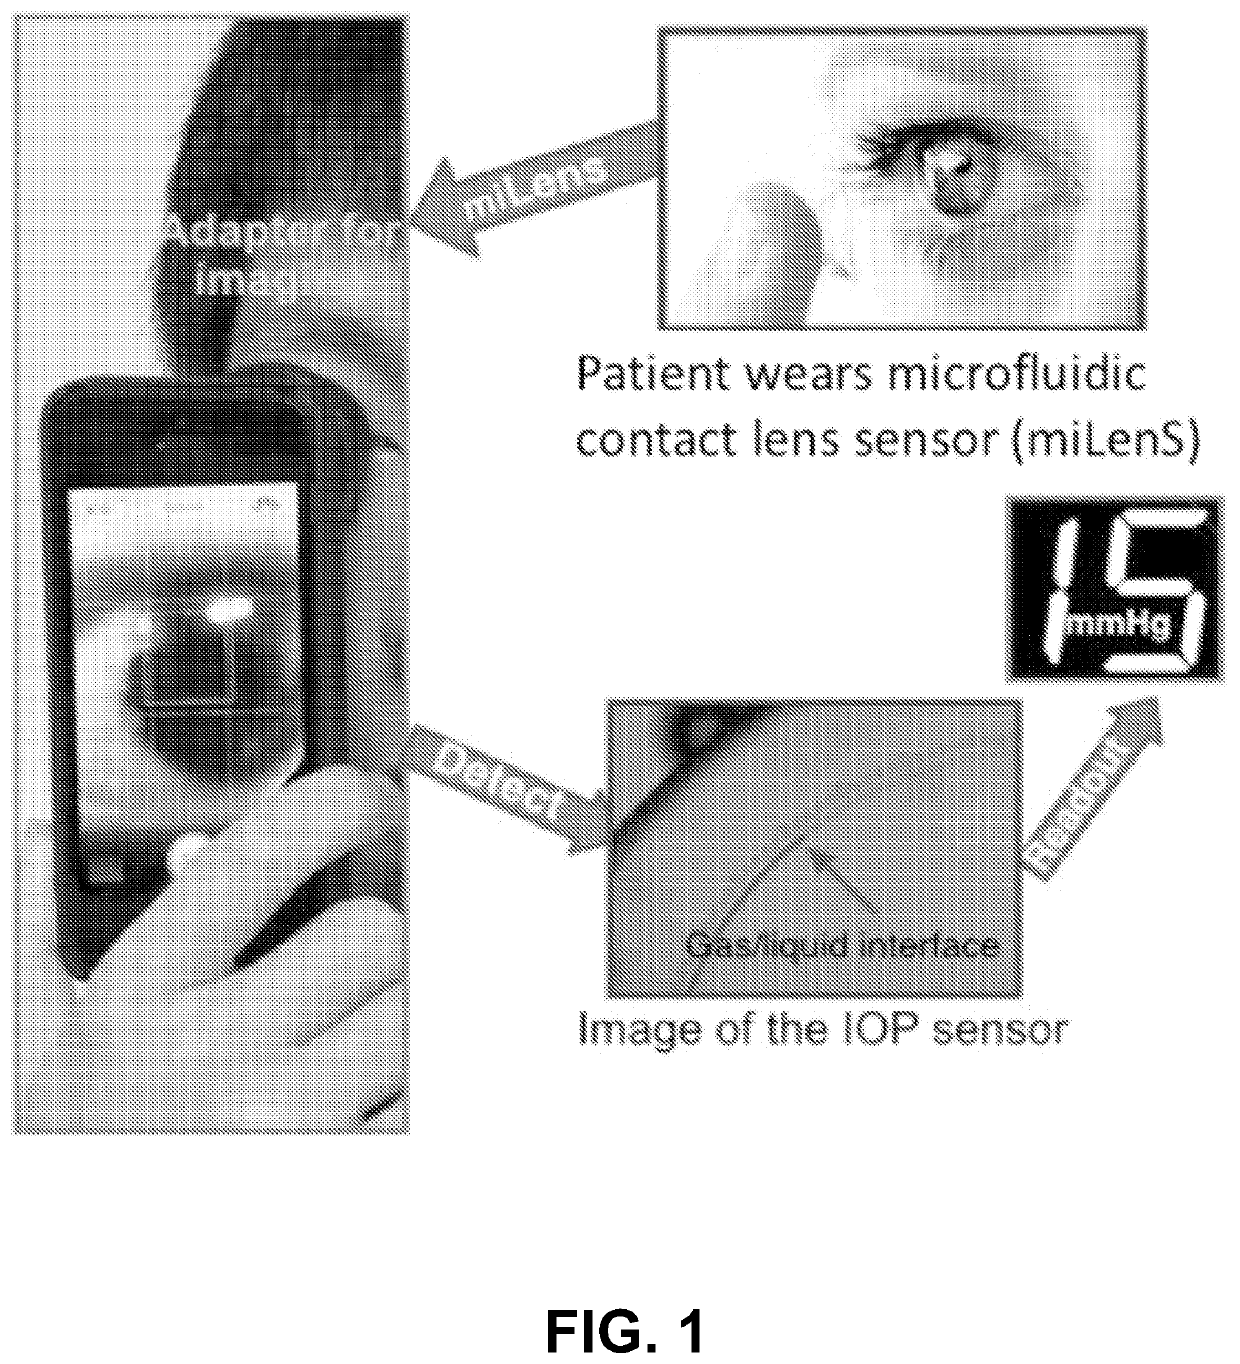 Closed microfluidic network for strain sensing embedded in a contact lens to monitor intraocular pressure